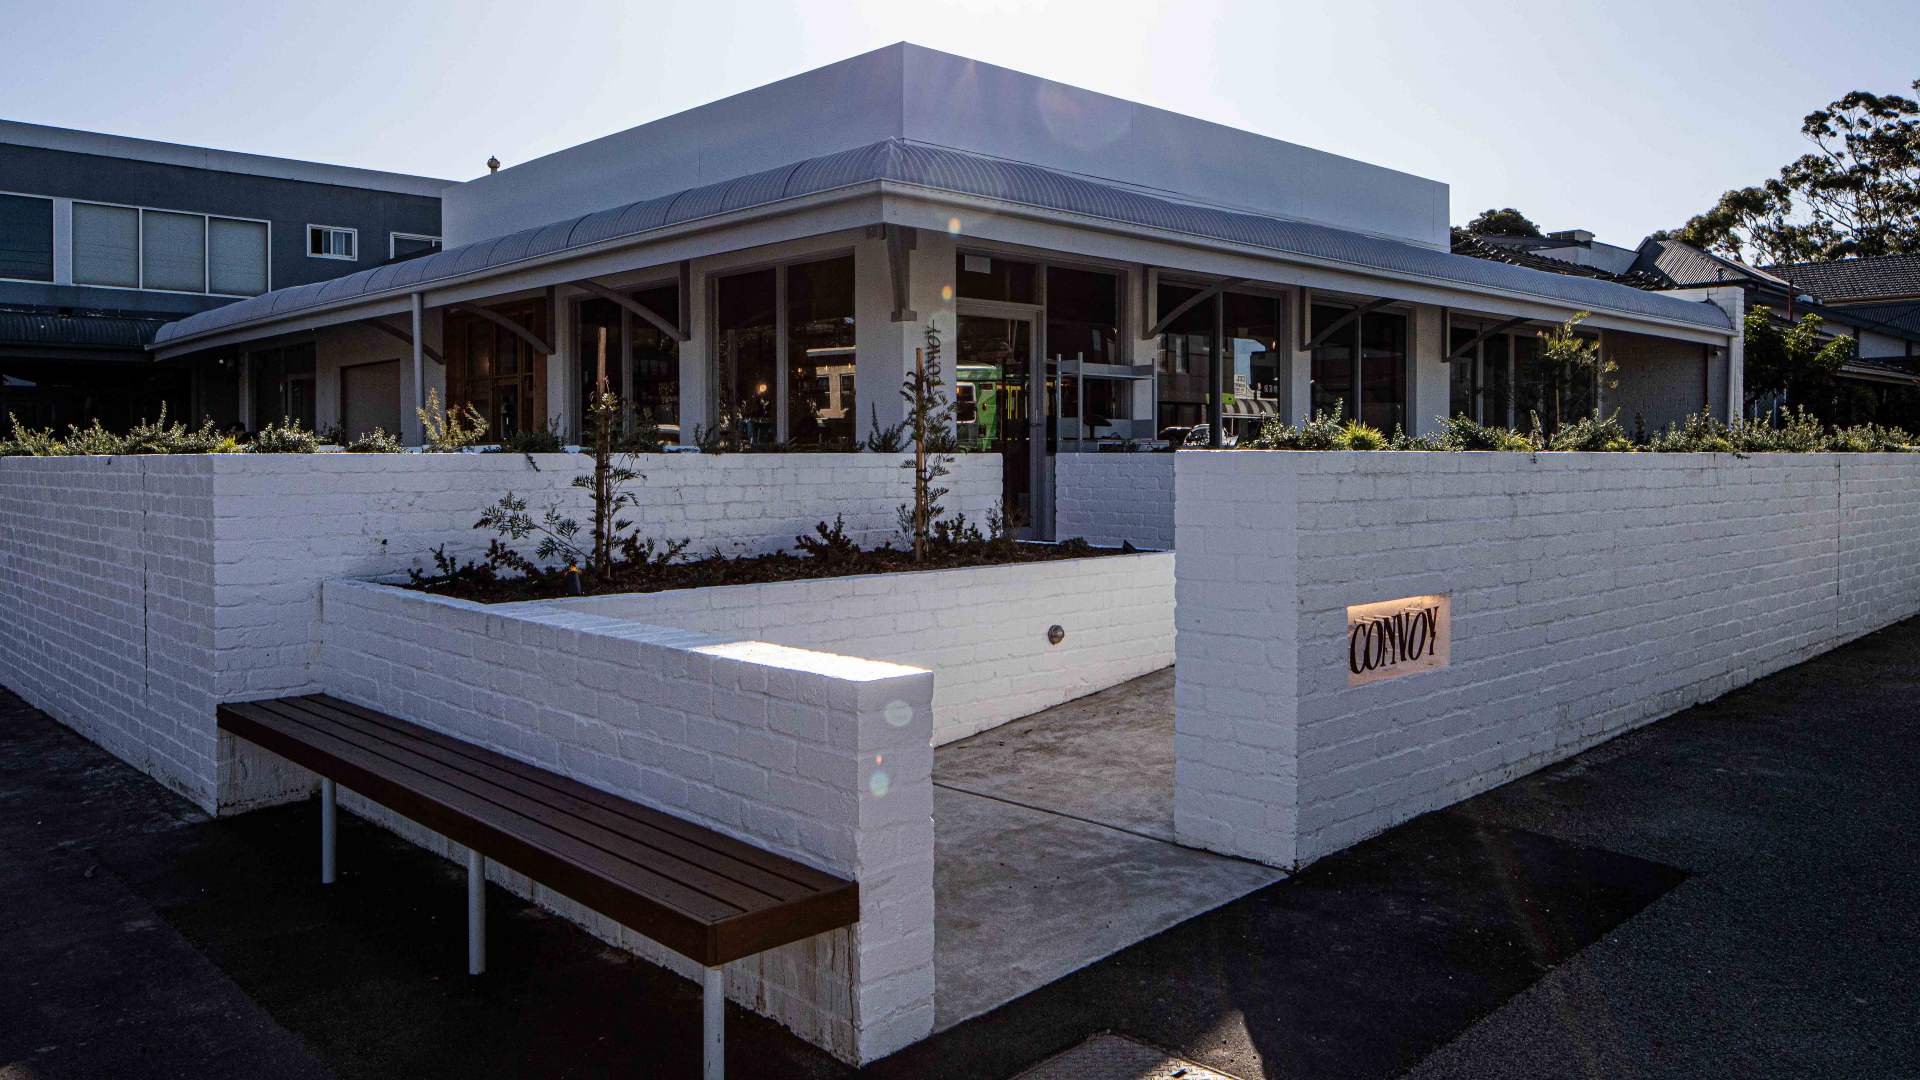 The exterior of Convoy cafe in Moonee Ponds.